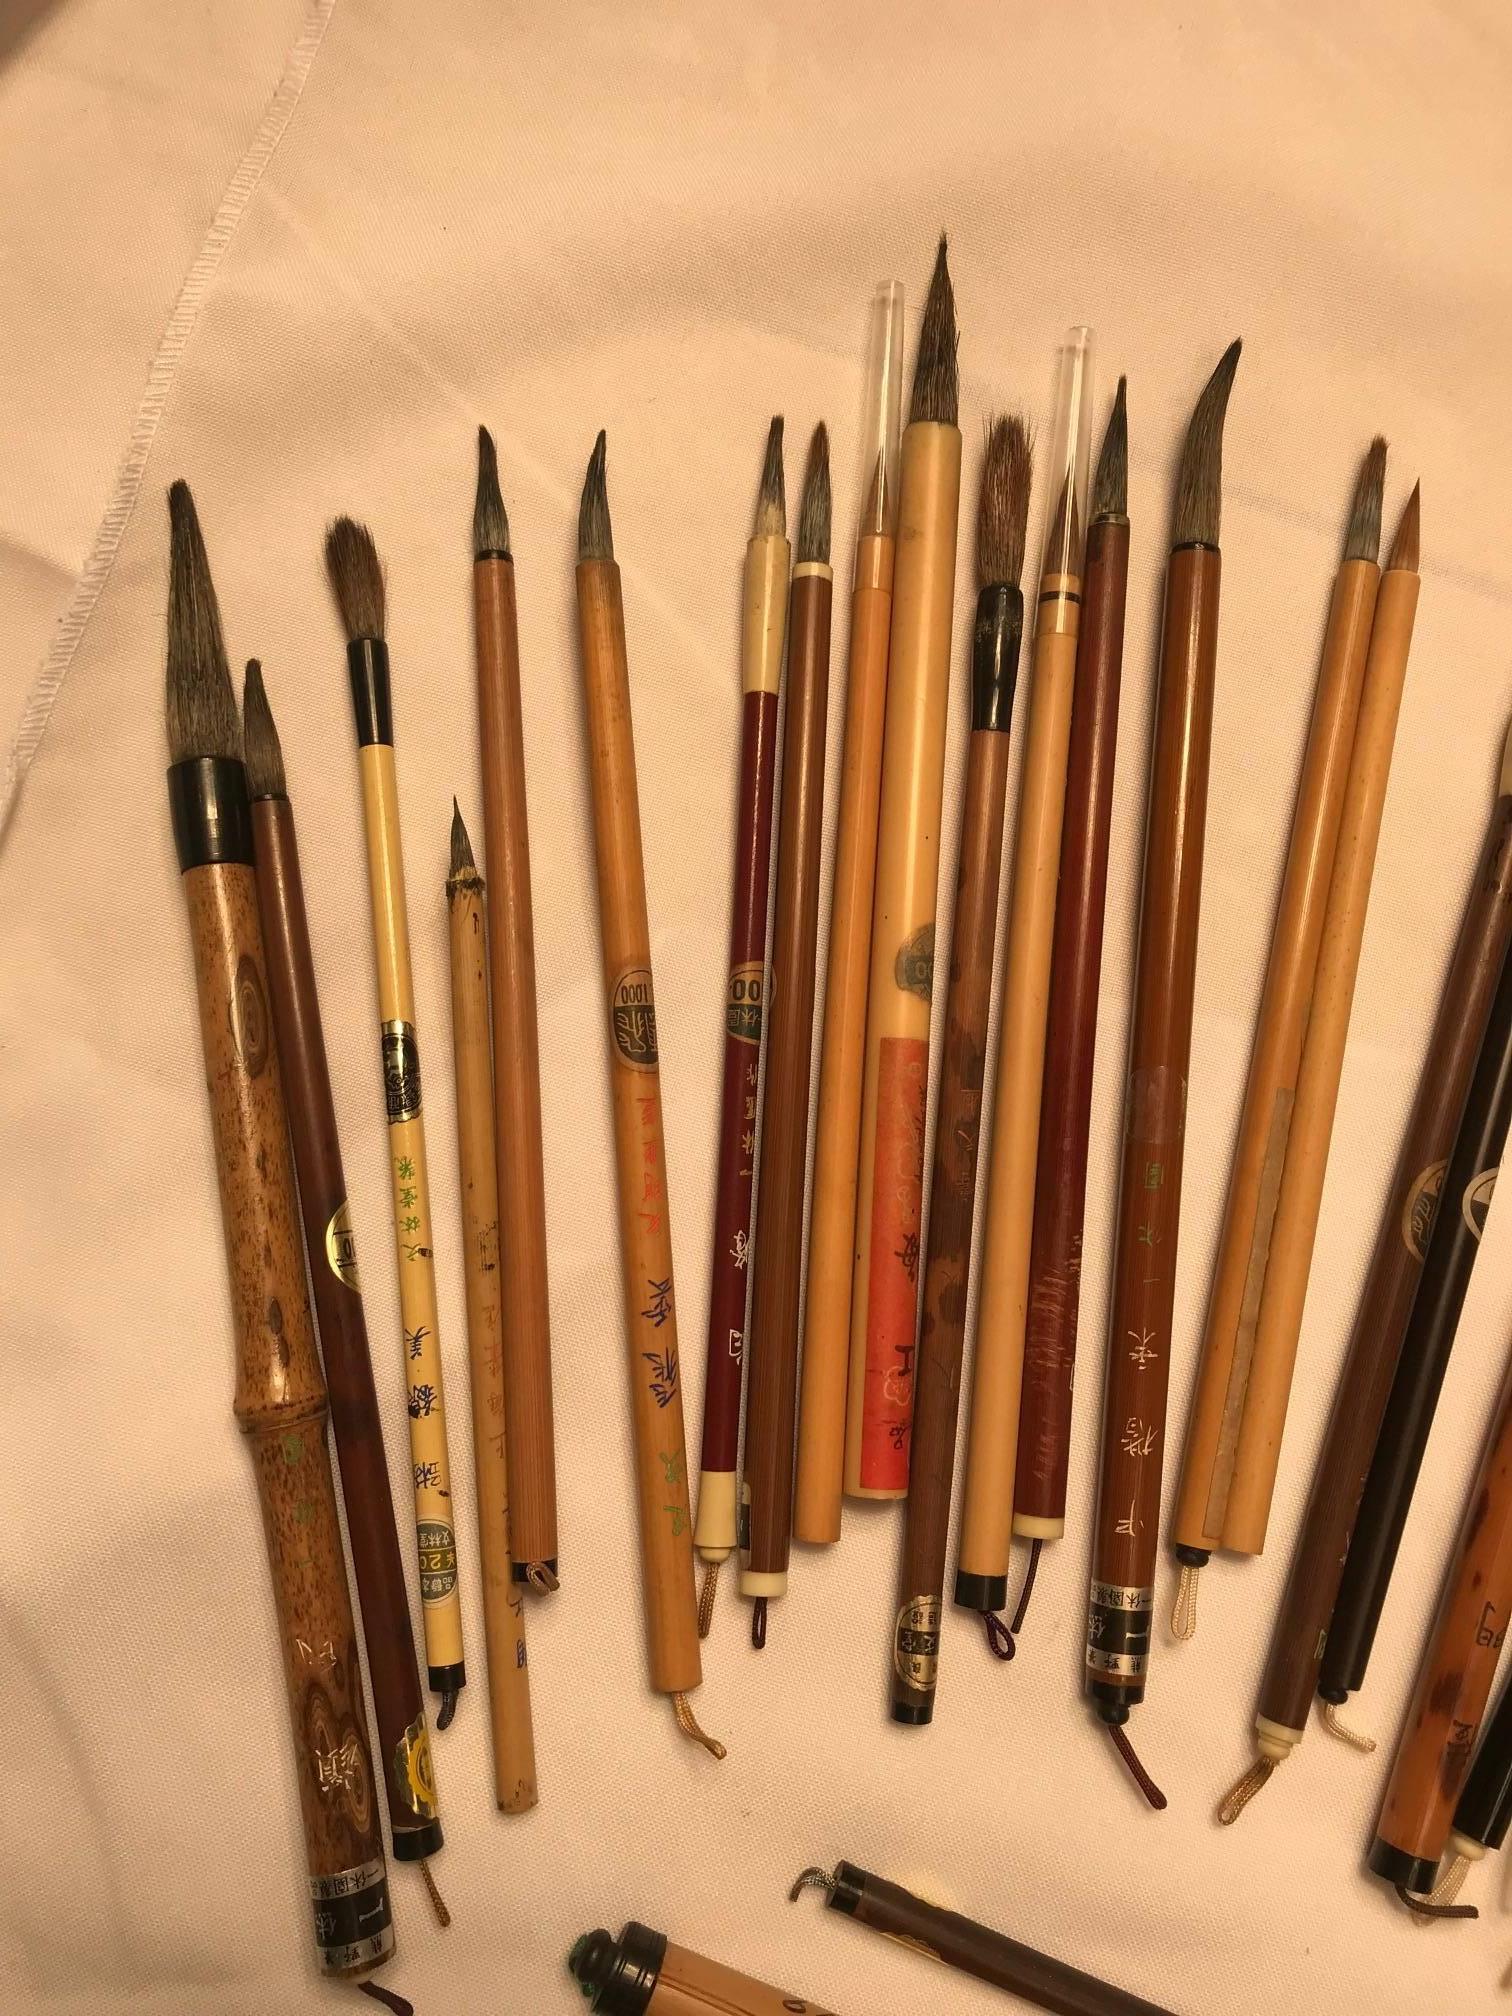 Hand-Crafted Artisan's Cache of 40 Old Chinese Paint Calligraphy Bamboo Brushes